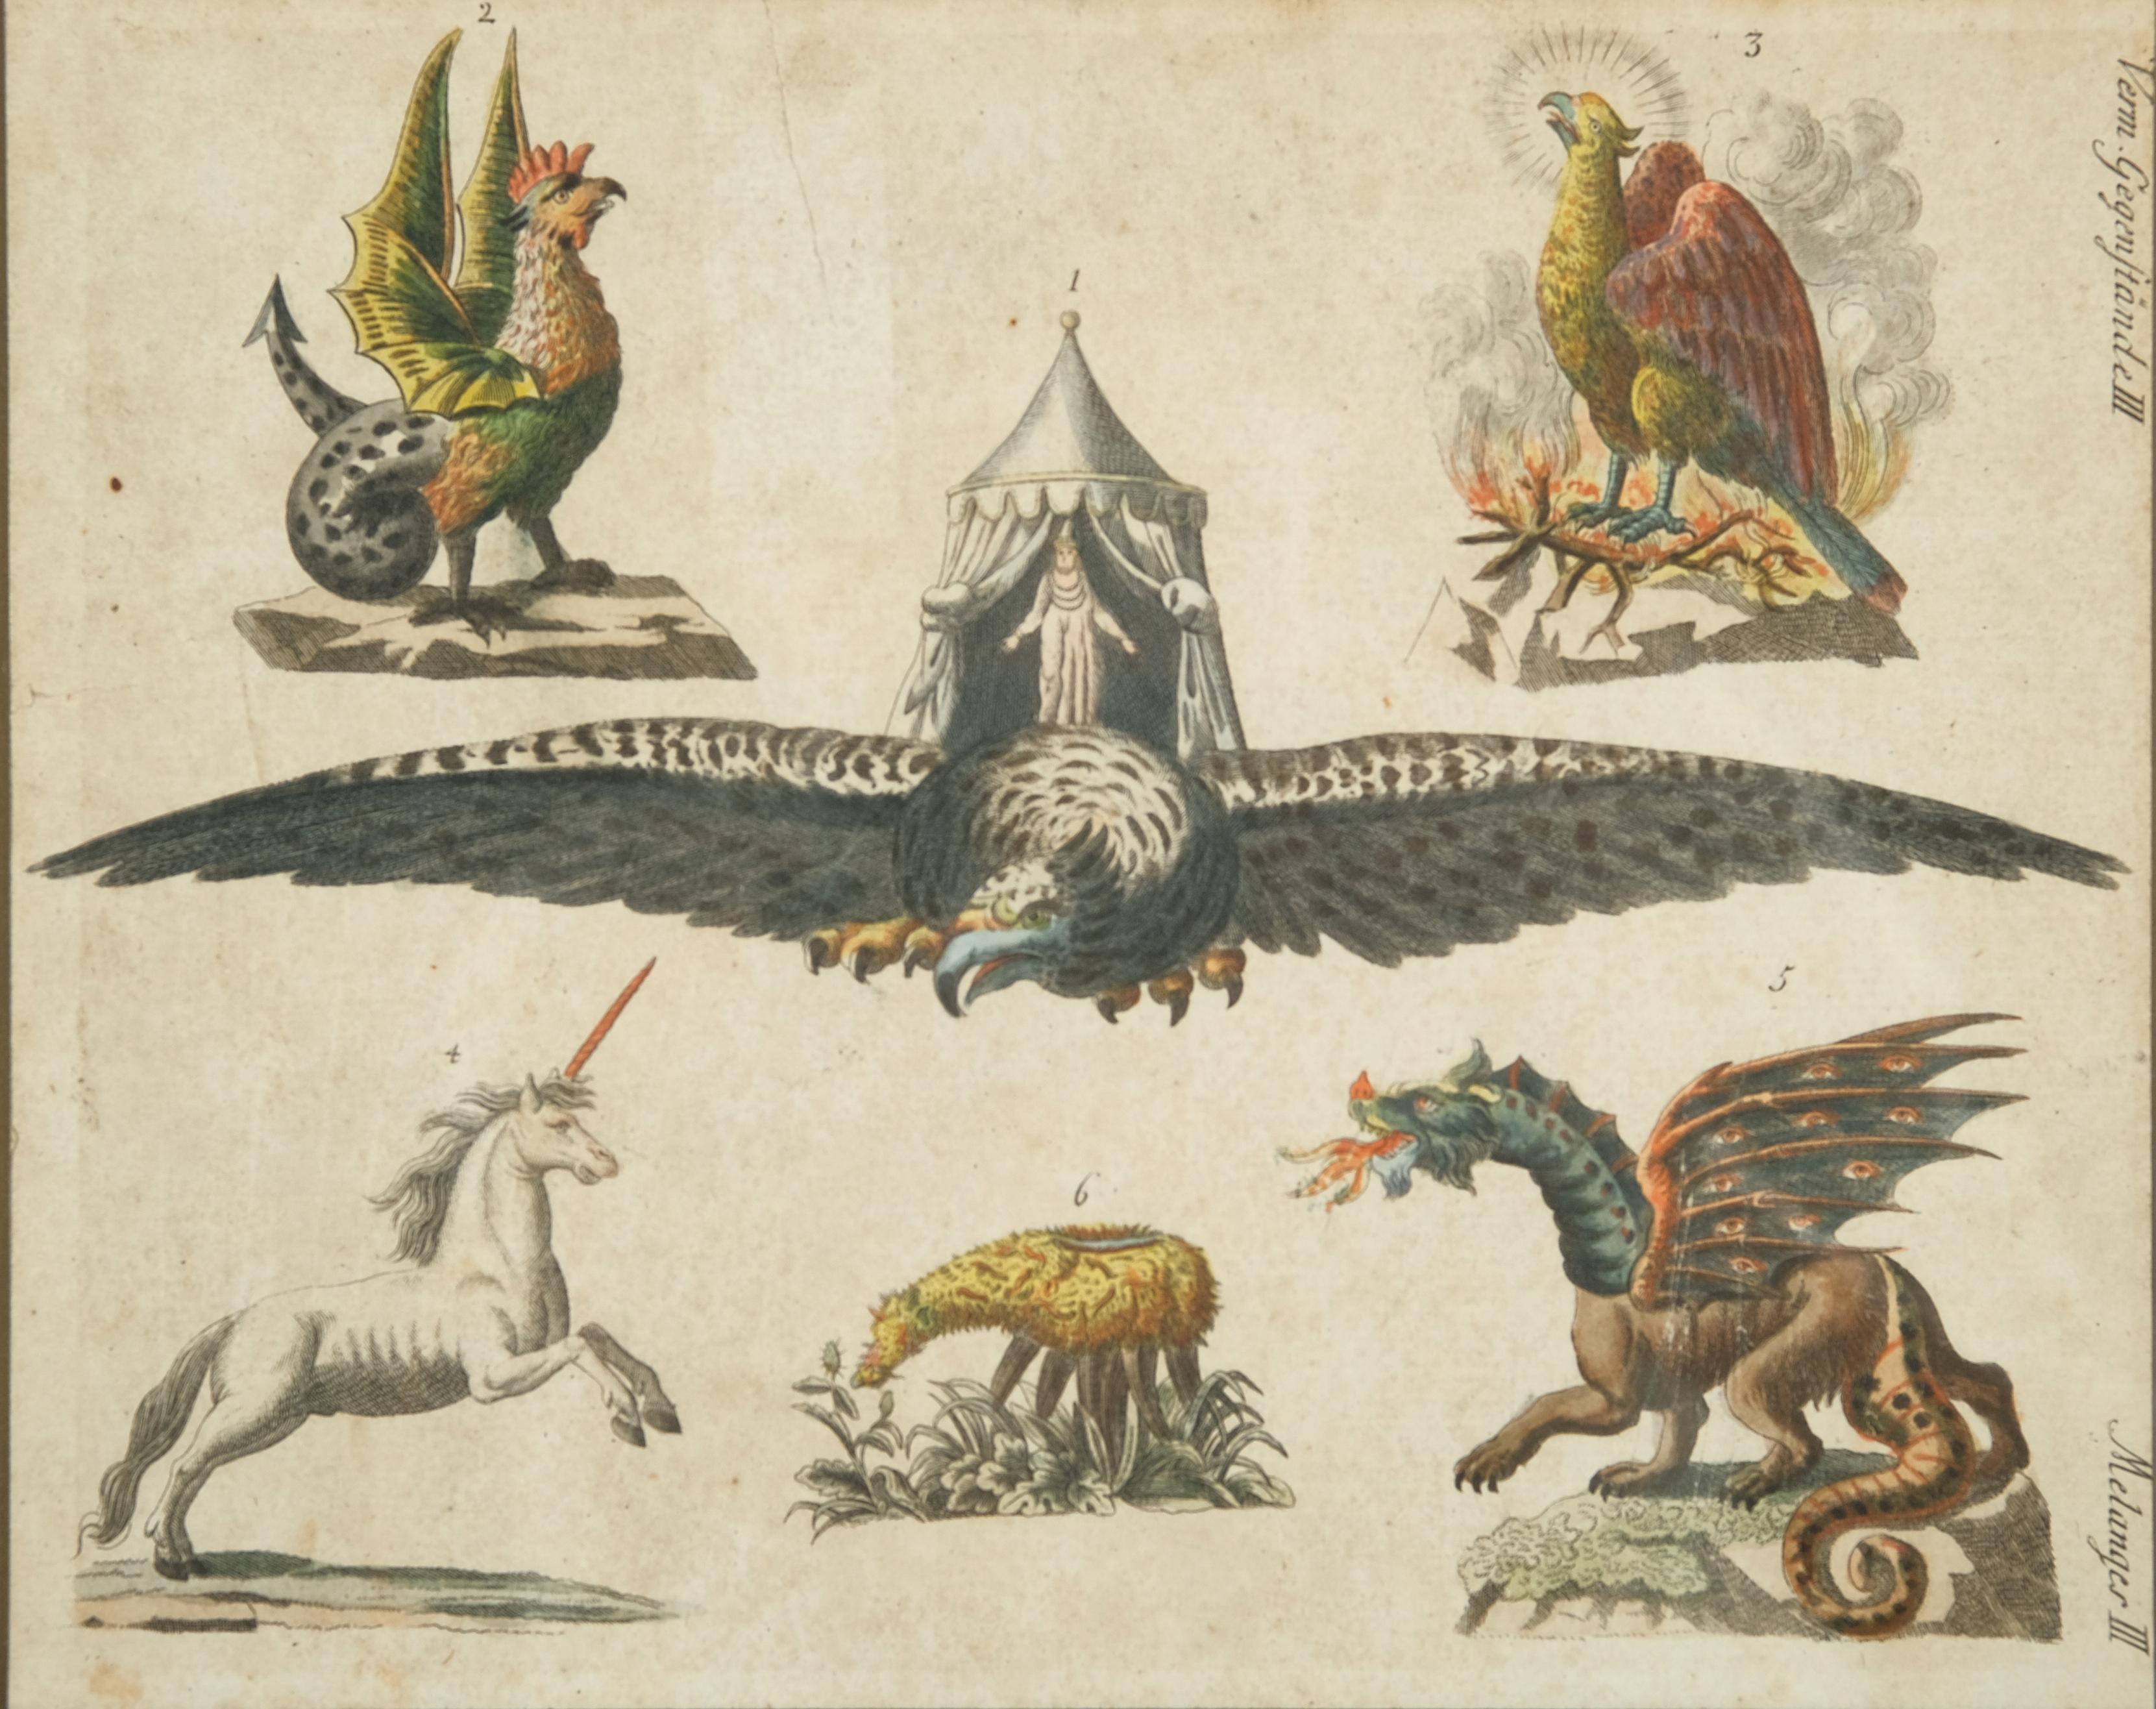 This antique engraving in frame depicts various mythical creatures and heraldic symbols in old original hand-coloring. Itresembles the style of Friedrich Justin Bertuch.

Friedrich Justin Bertuch (1747–1822) was a German publisher and patron of the